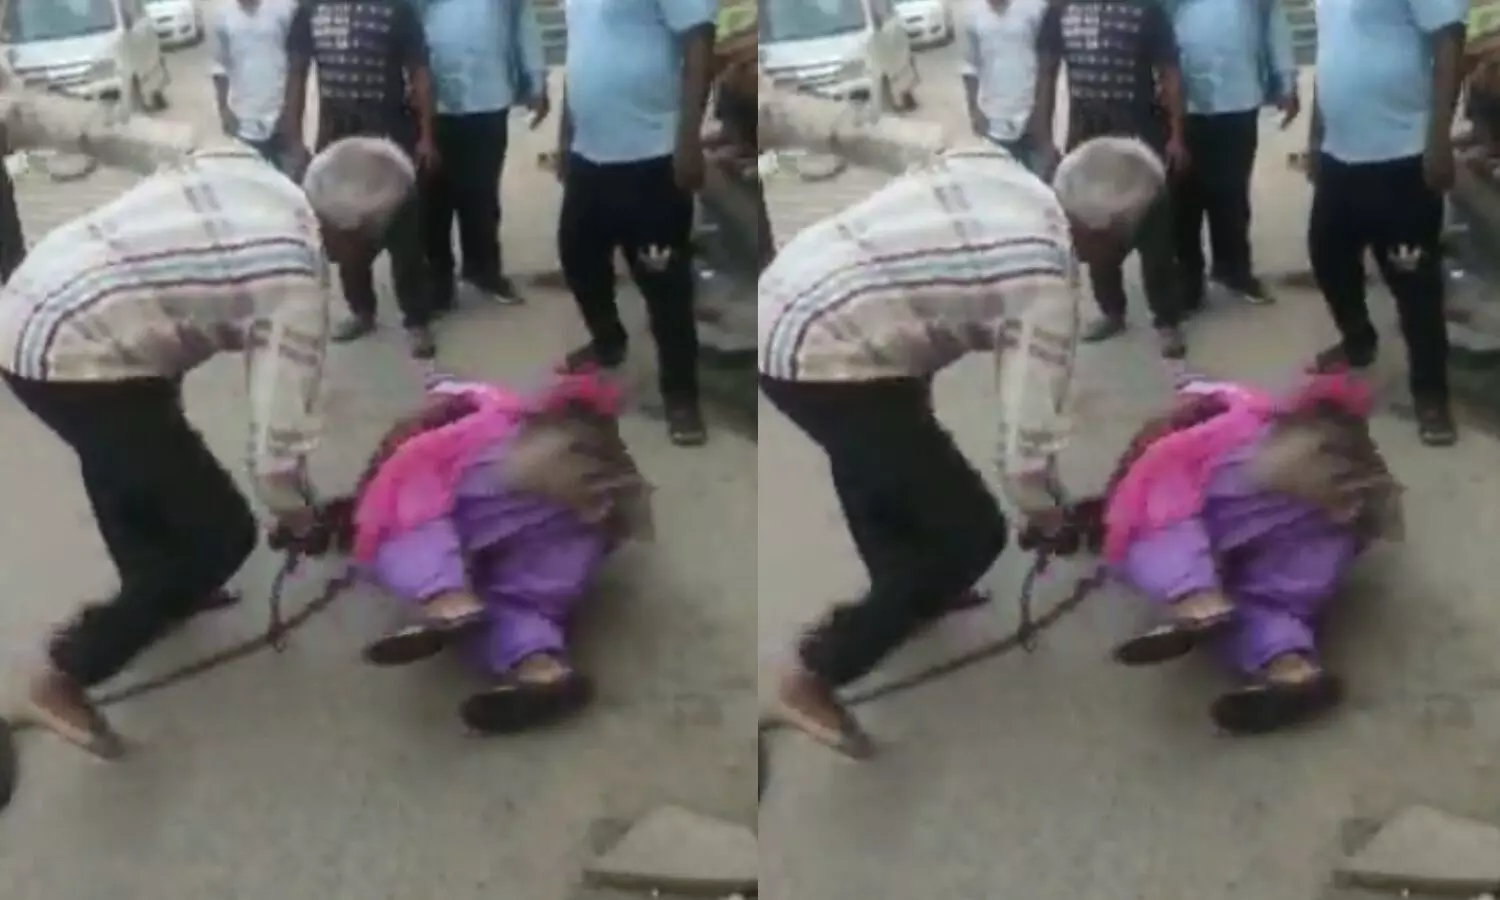 father-in-law beating daughter-in-law